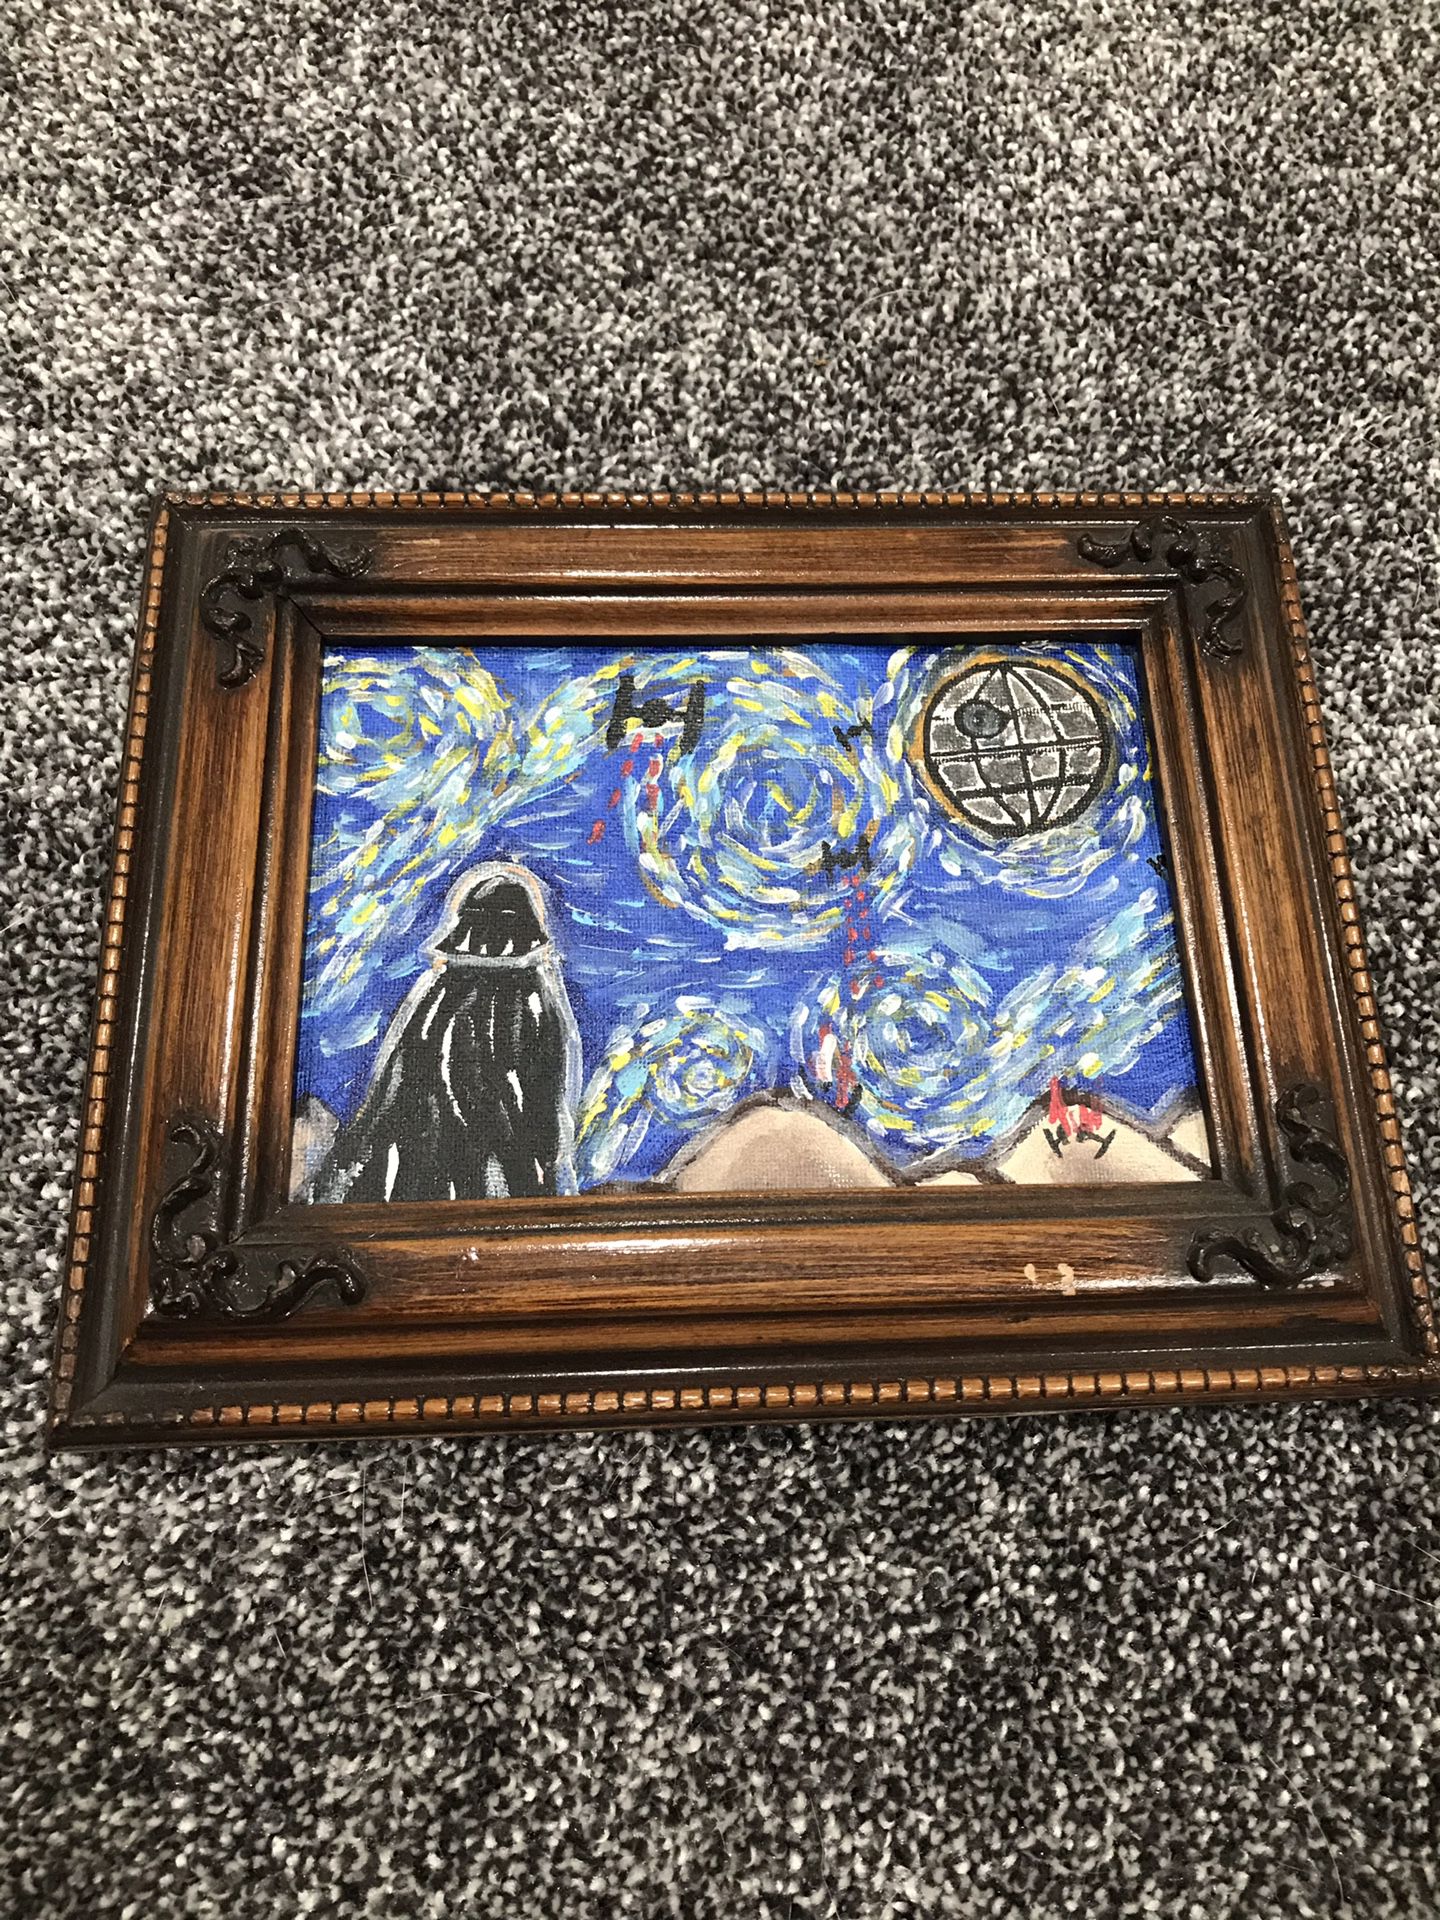 Star Wars Painting 7 1/2 x 9 1/2 inches